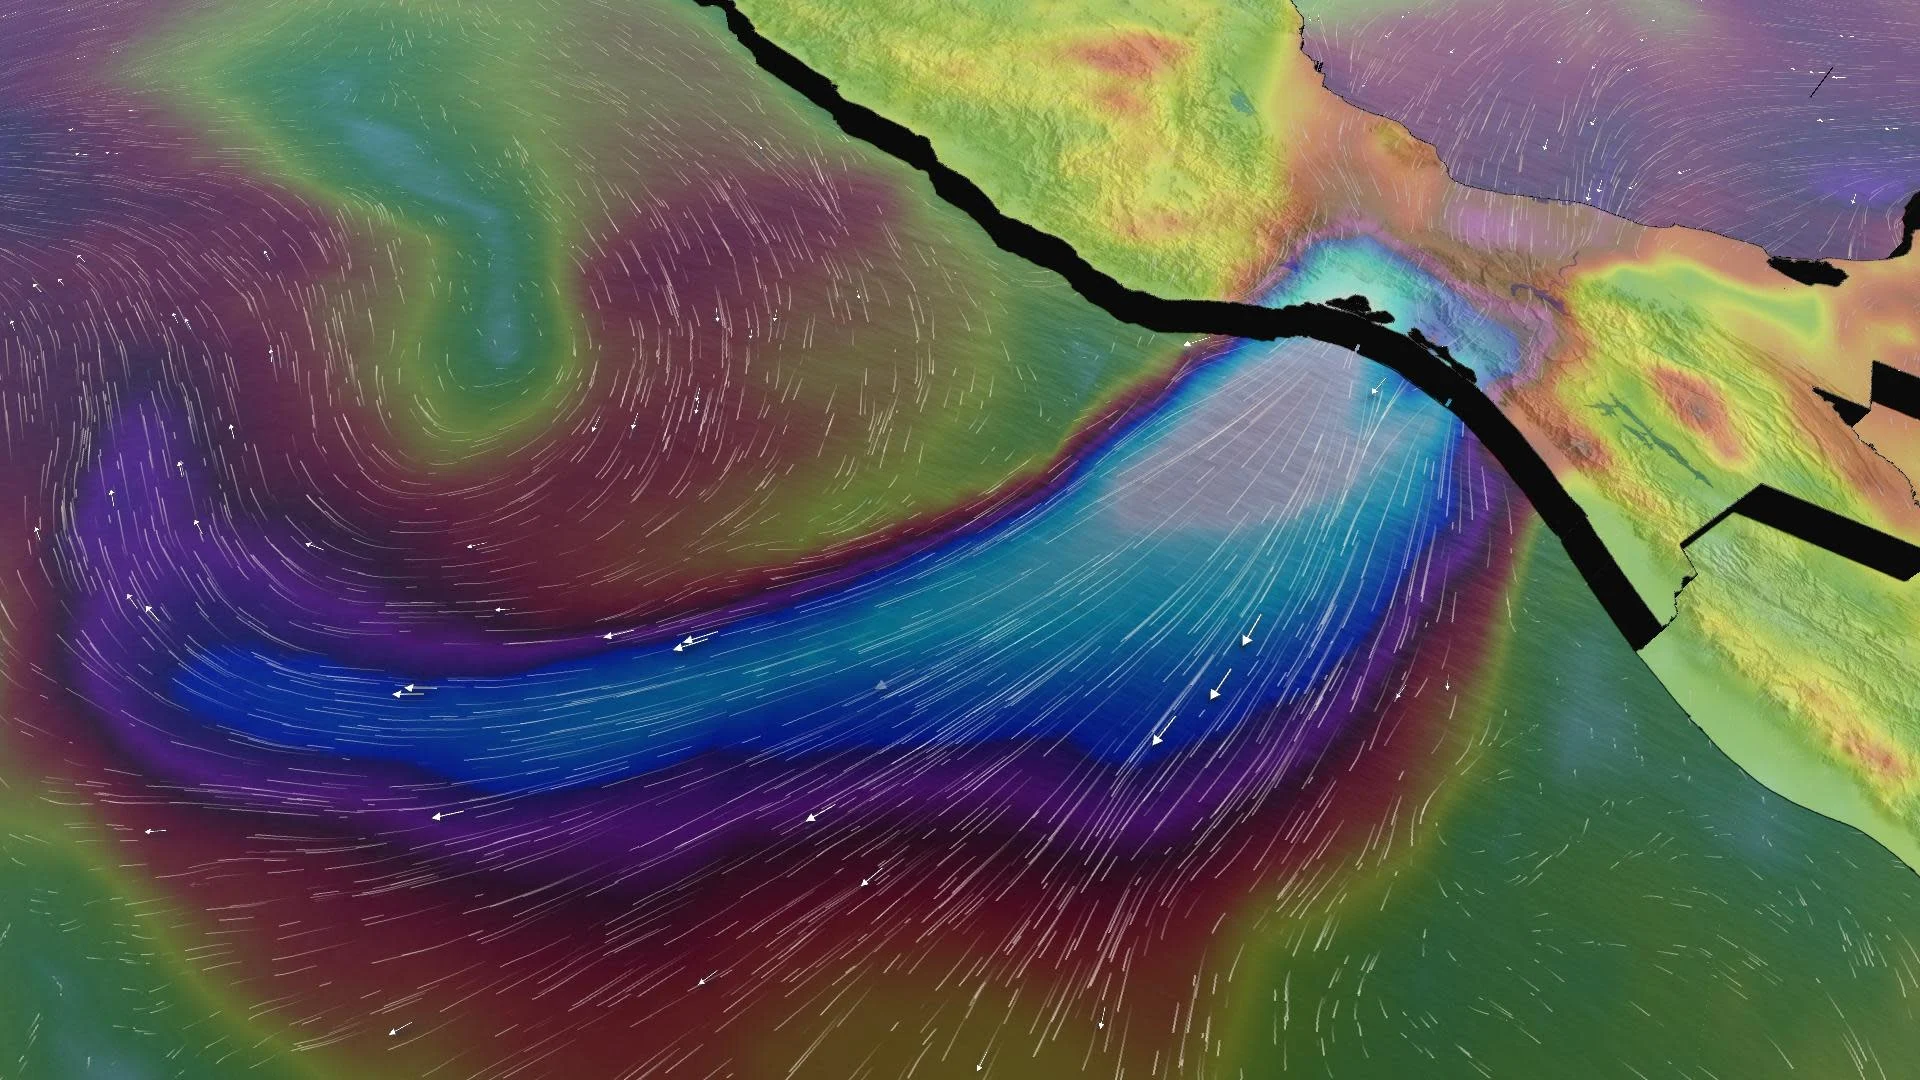 Canada’s cold air brings Mexico some of Earth’s most violent winds